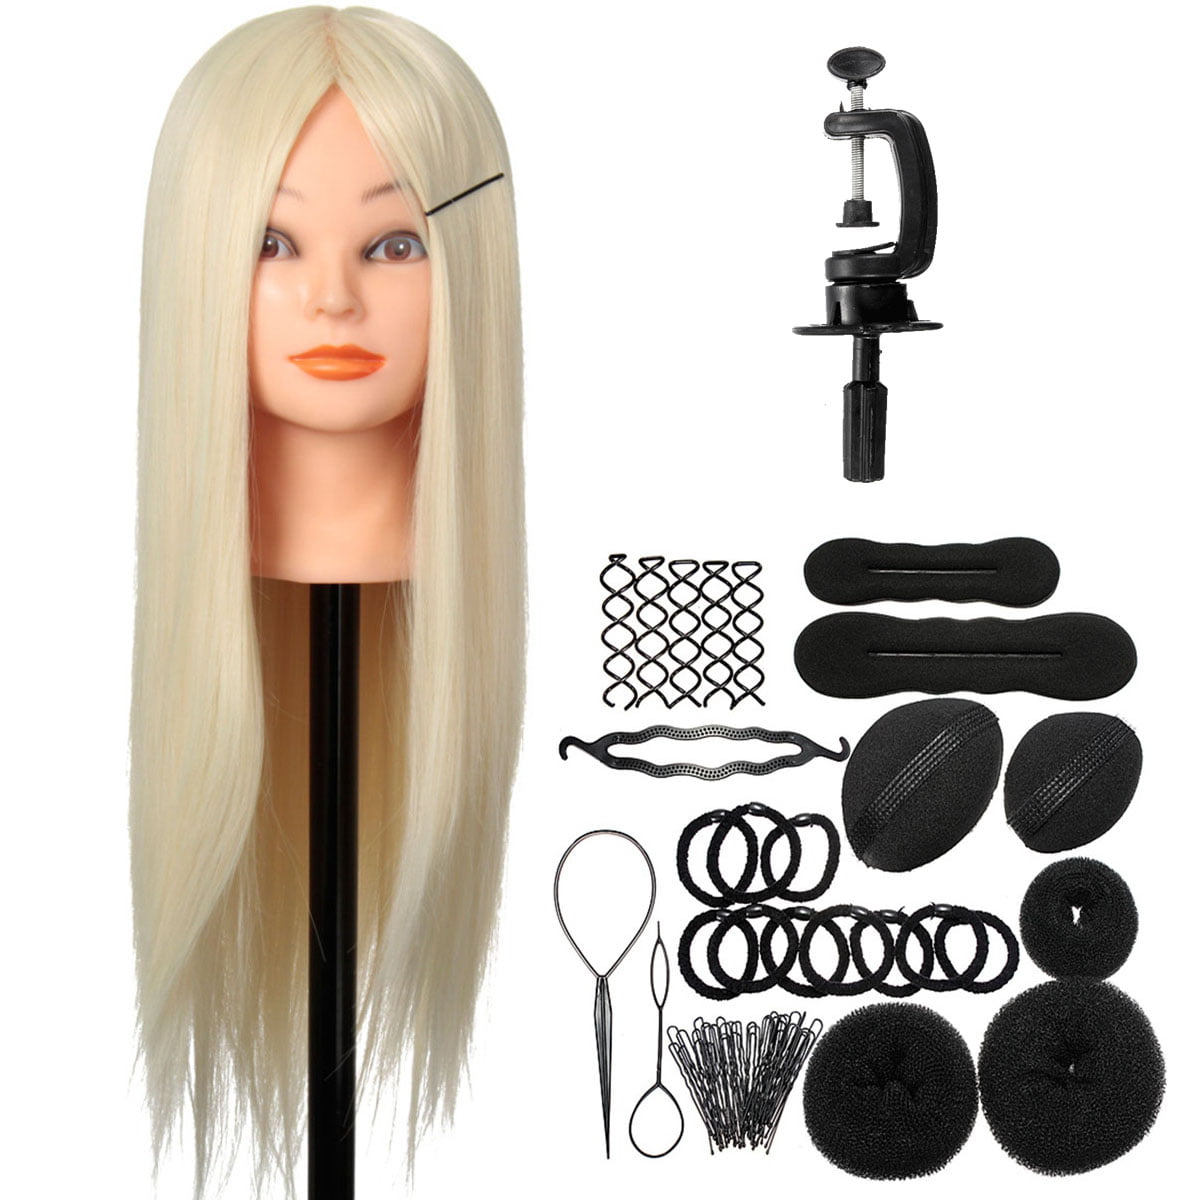 29Inch Synthetic Hair Mannequin Head For Hairstyles Hairdressing Training  Head Dummy Doll With Clamp Mannequin For Hairstyles| AliExpress | Long Hair  Training Head Model Hairdressing Clamp Stand Dummy Practice Mannequin |  